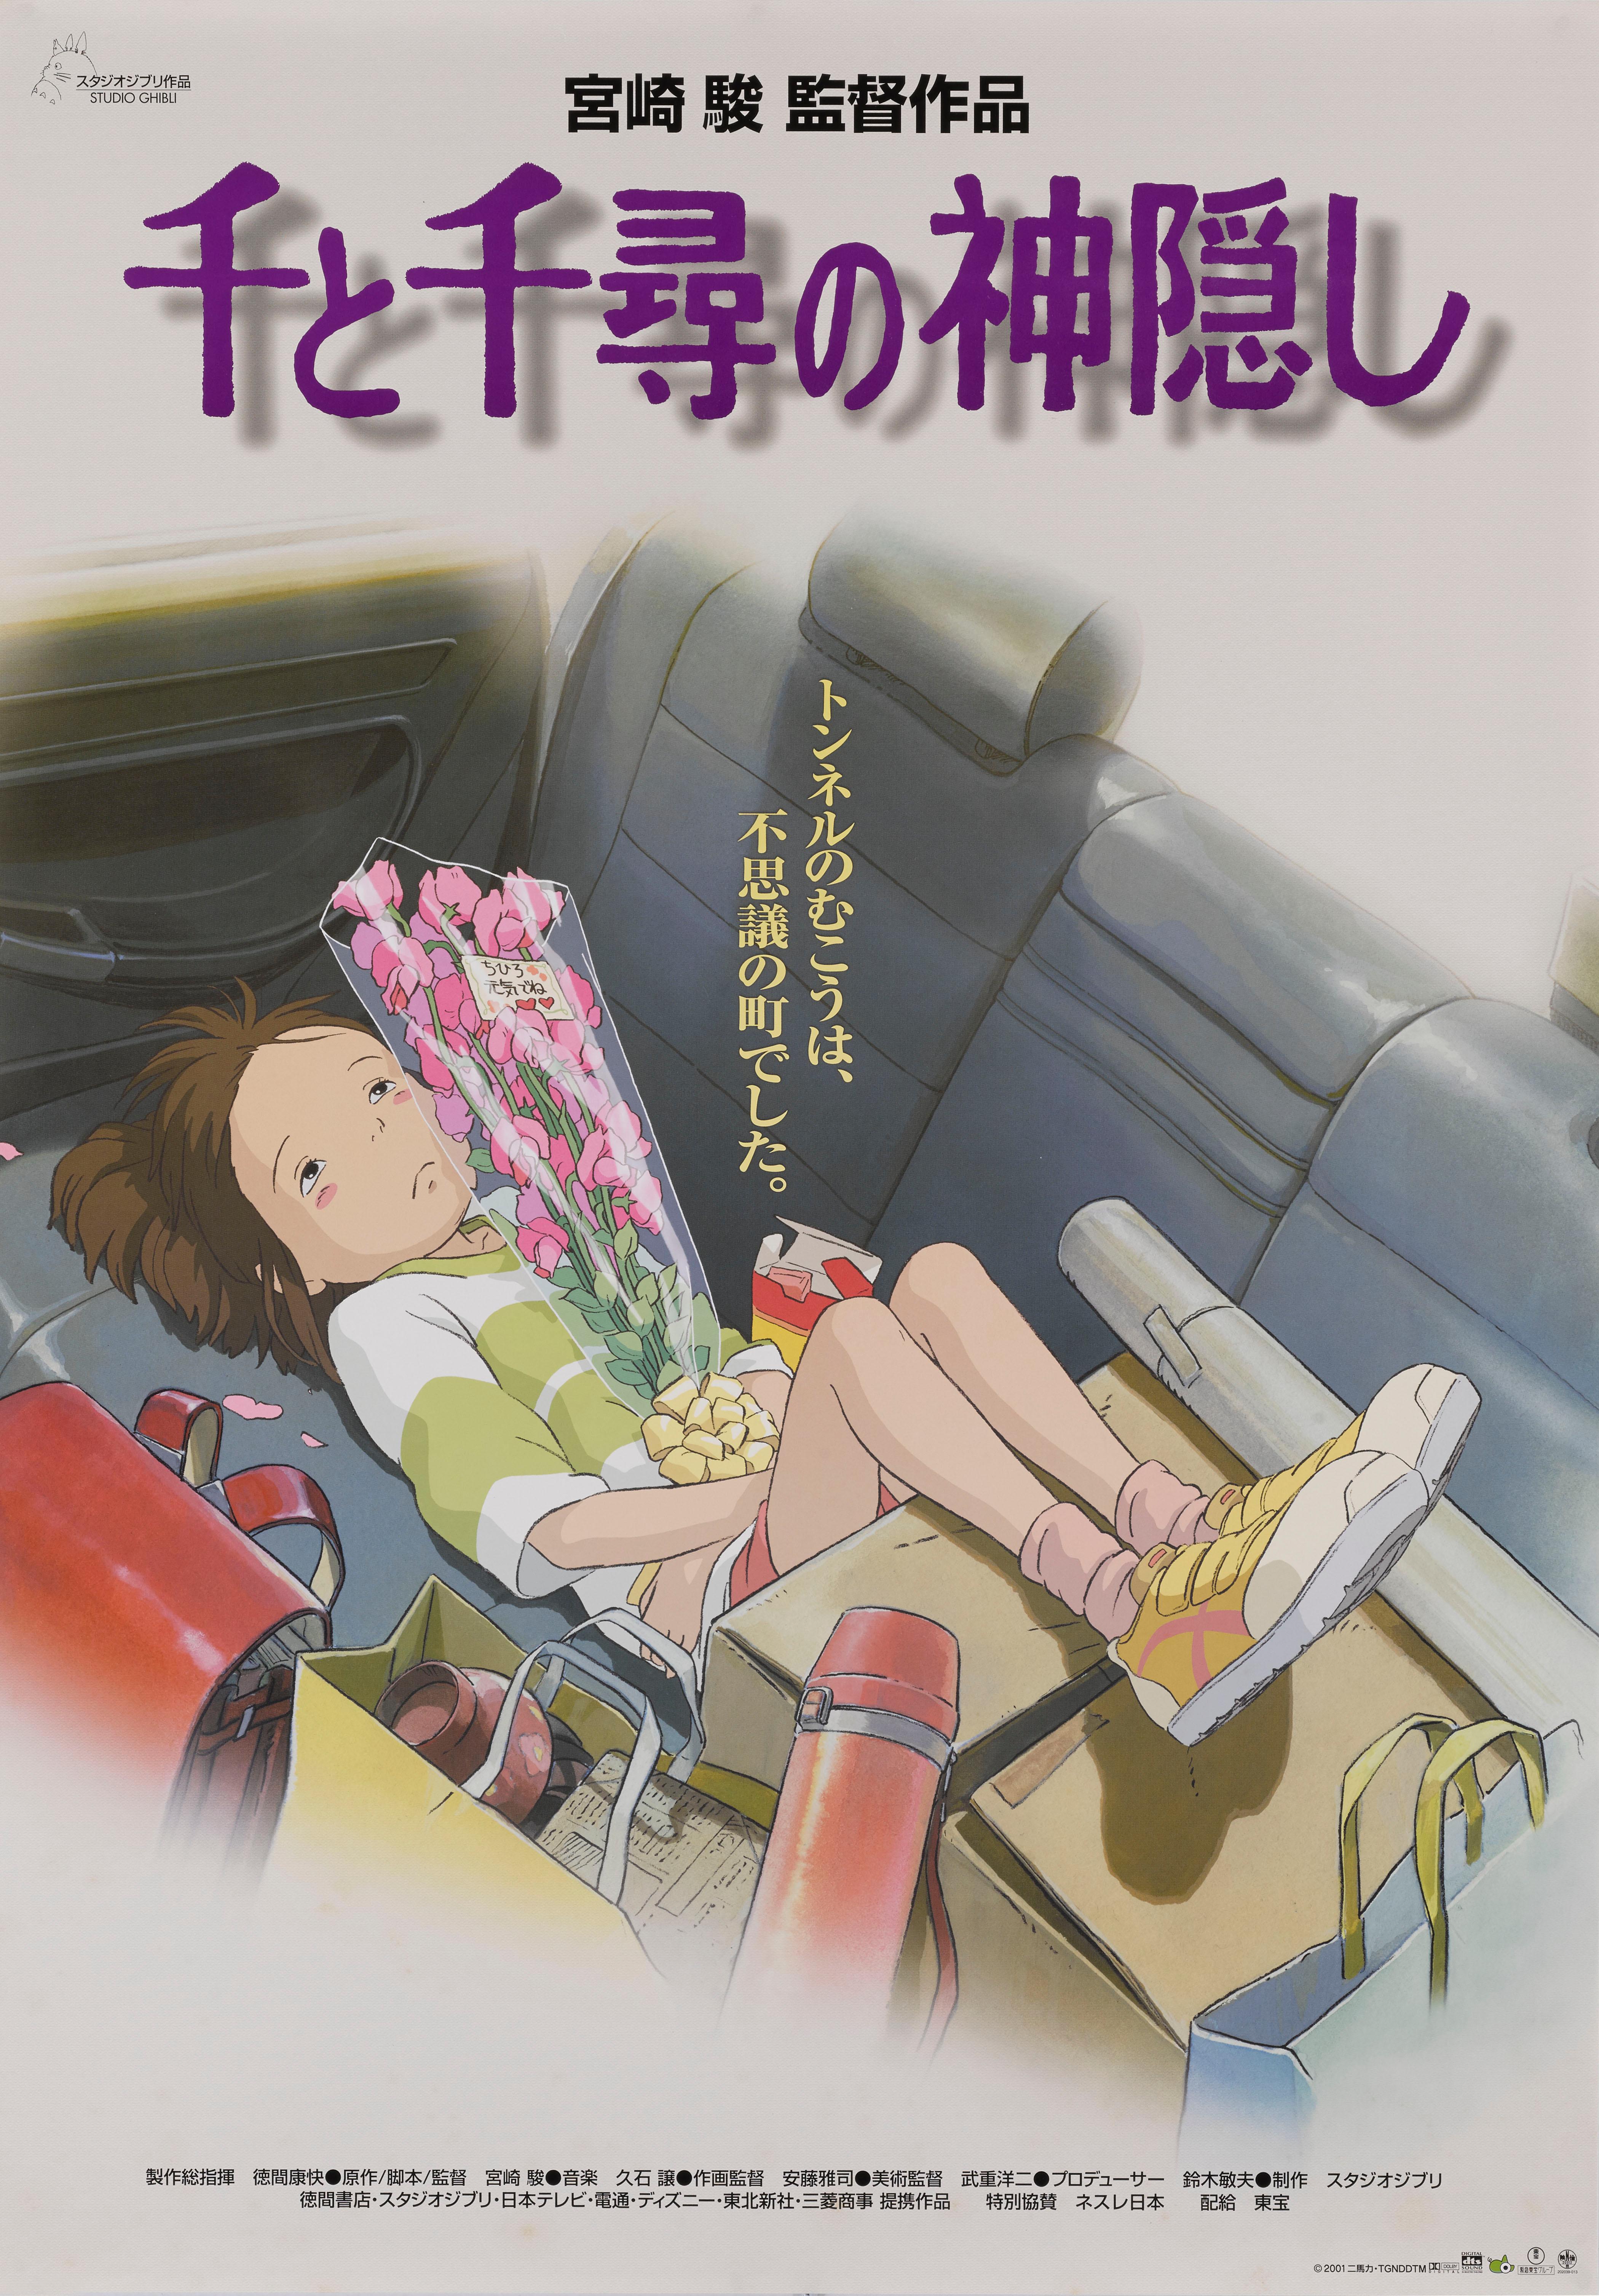 Original Japanese movie poster for the 2001 Studio Ghibli animation.
This is the advance style Japanese poster and shows different artwork to all the other posters on this title.
 